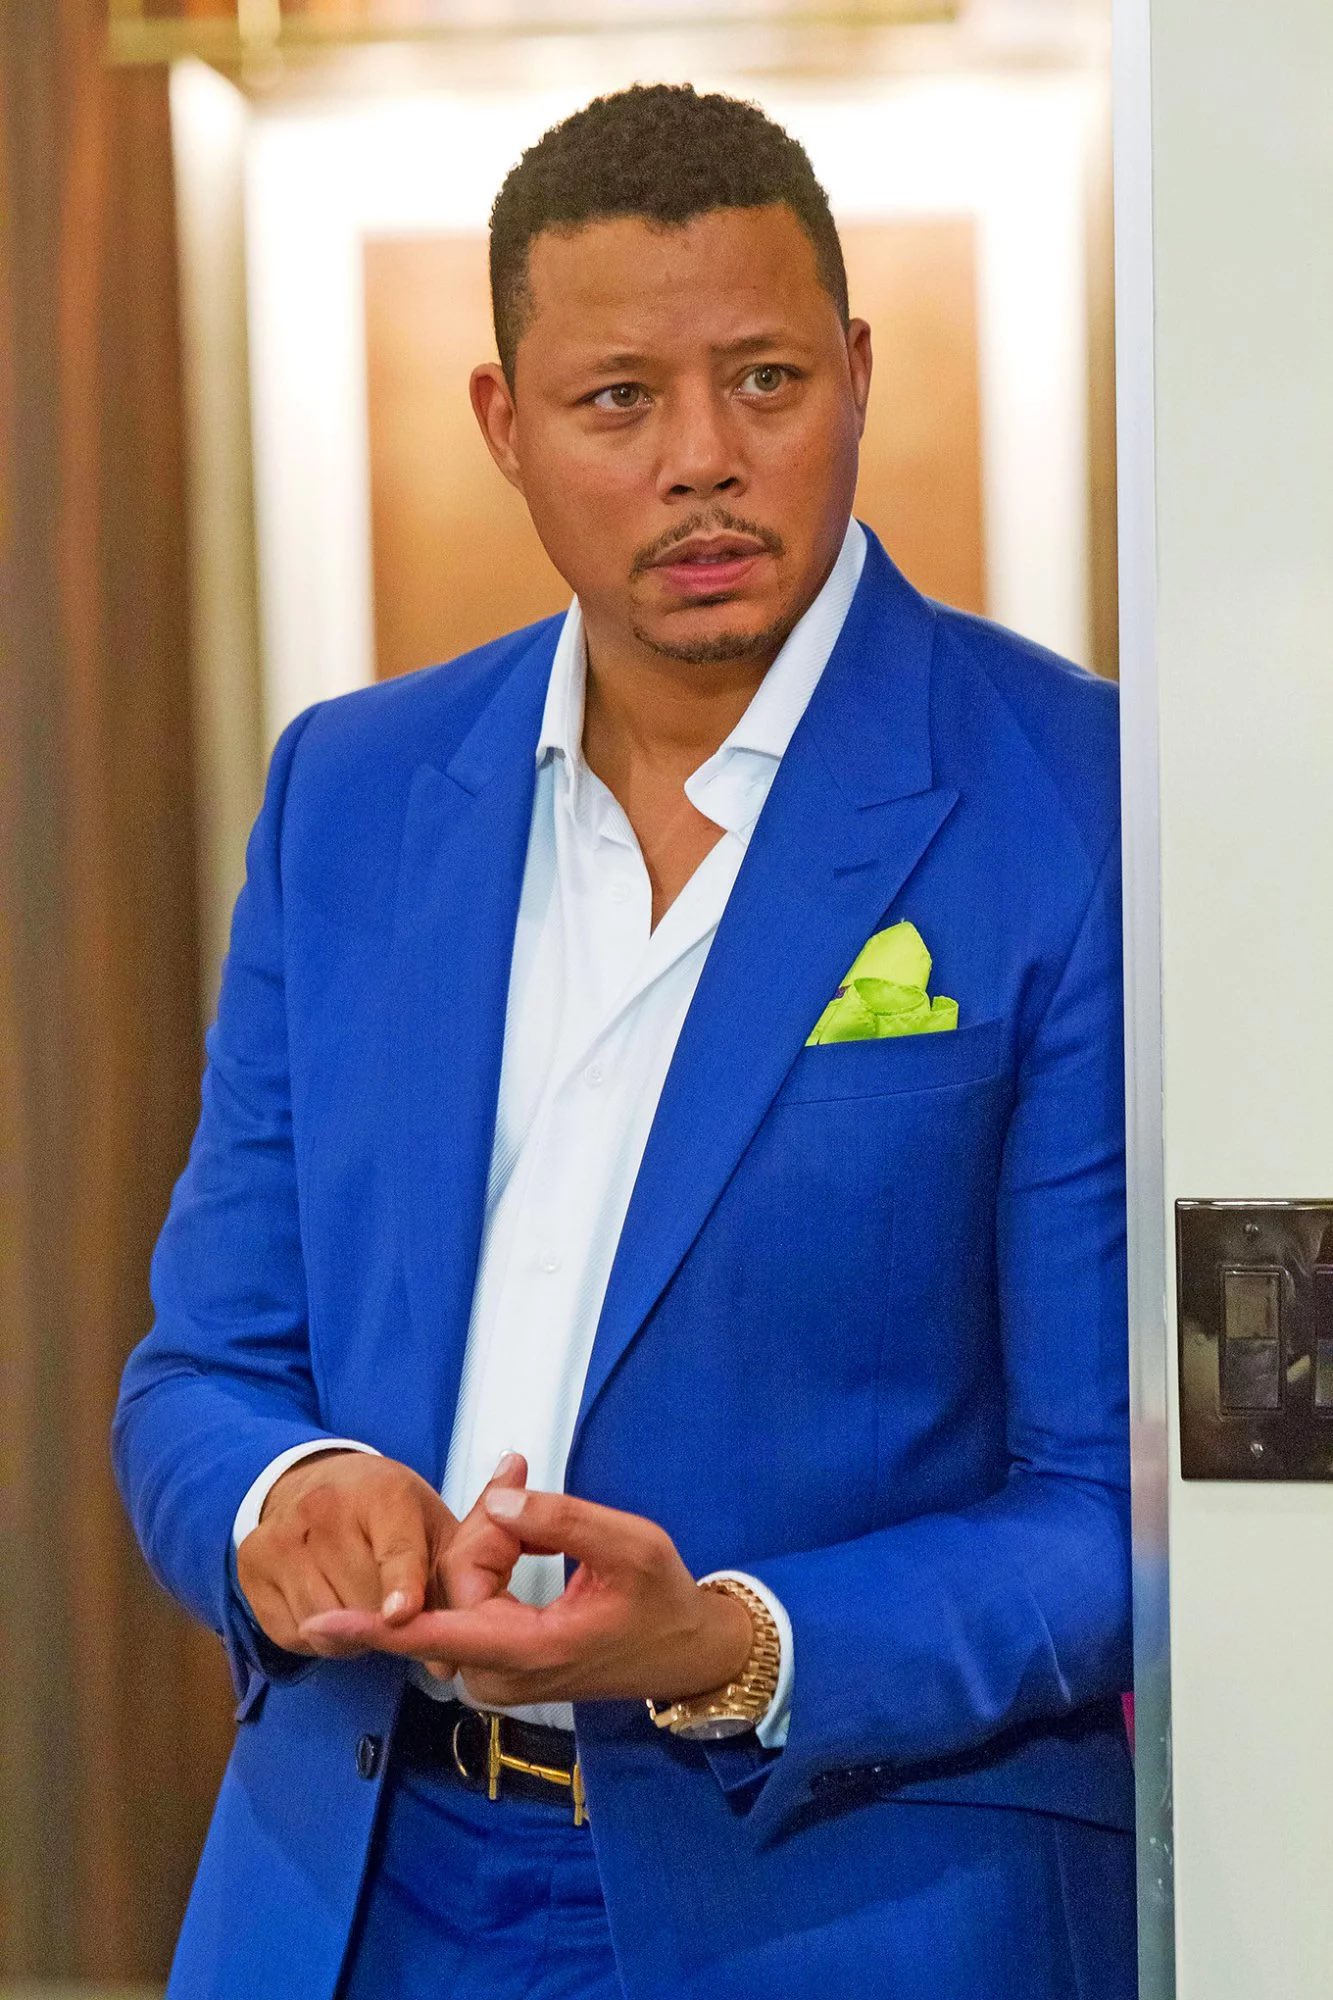 Wishing a Happy 52nd Birthday to Terrence Howard  . What s your favorite tv/movie role by him?  